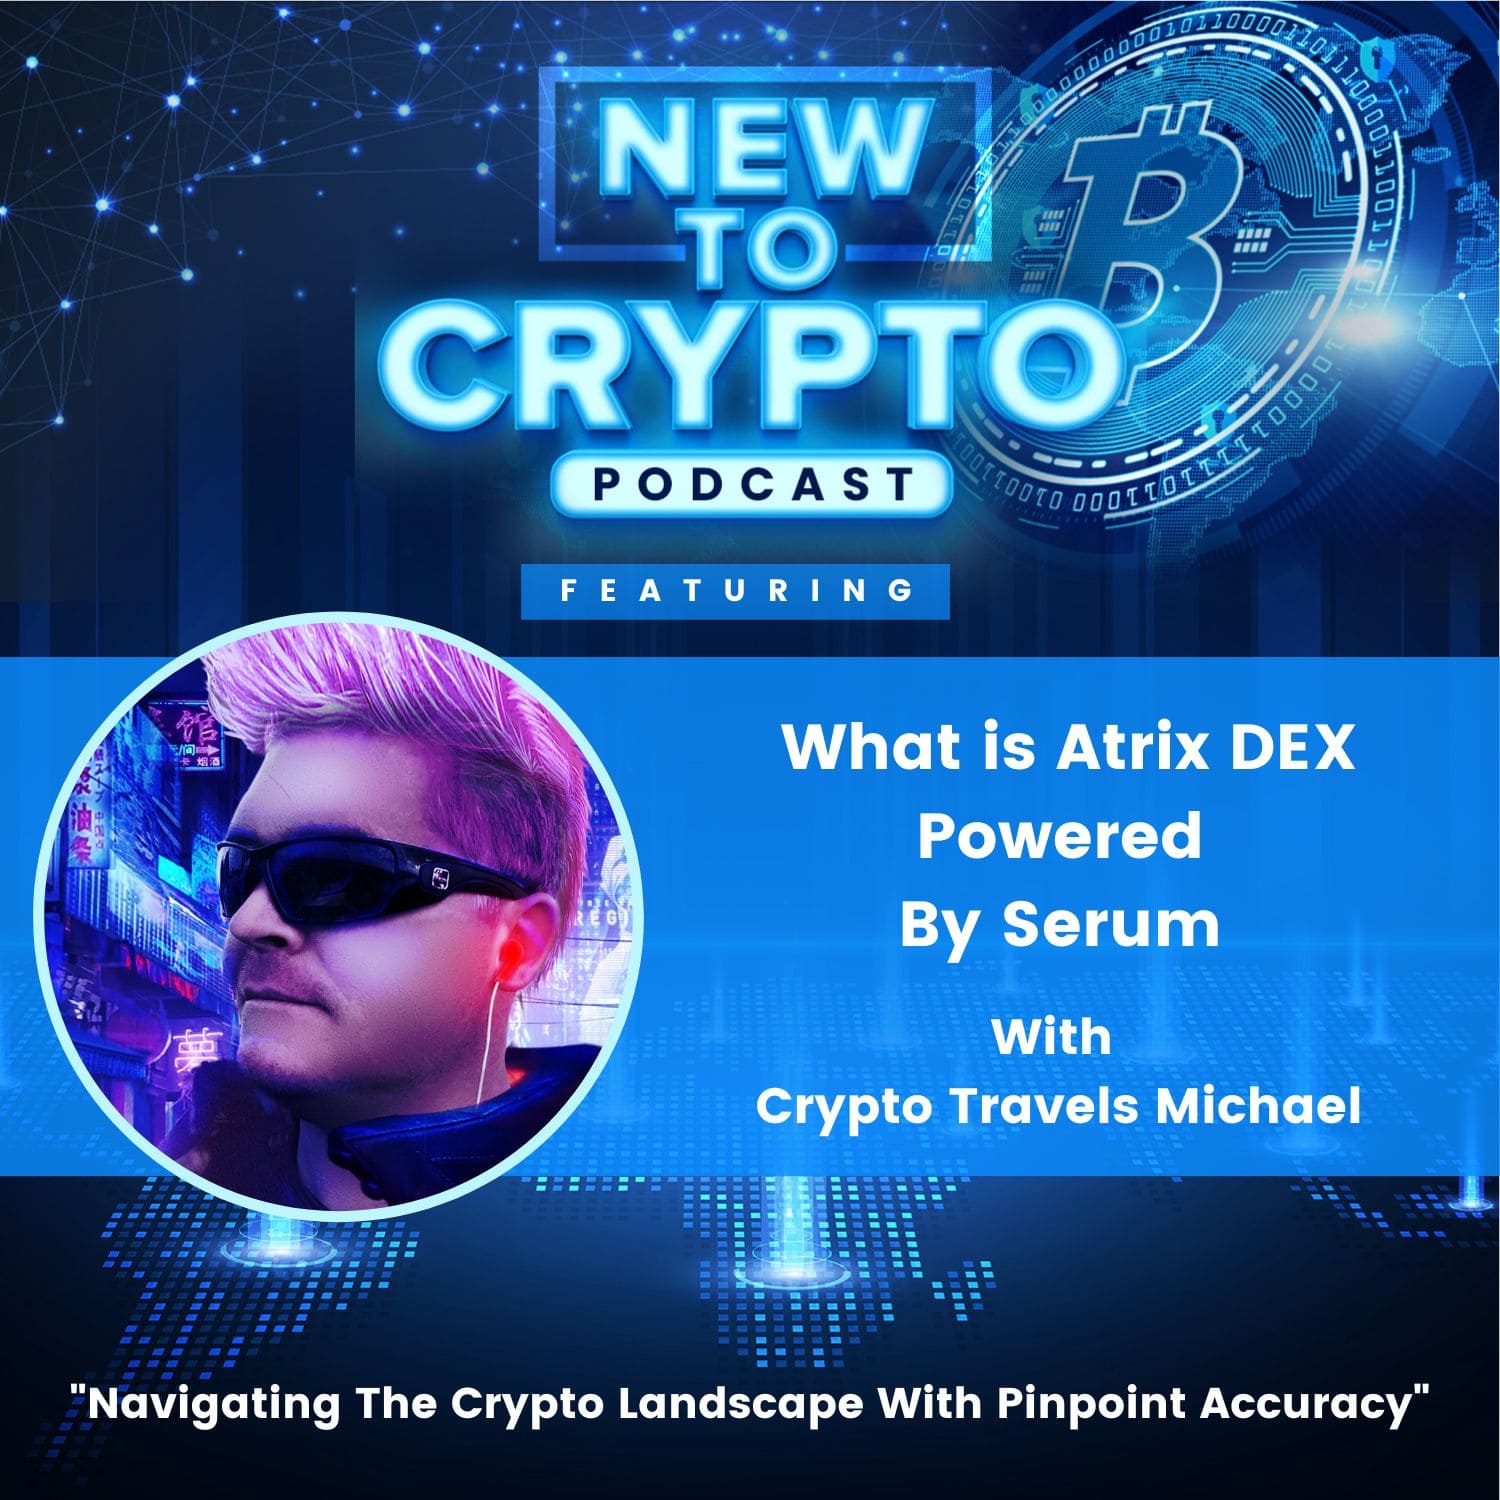 What is Atrix DEX powered by serum New To Crypto ep art